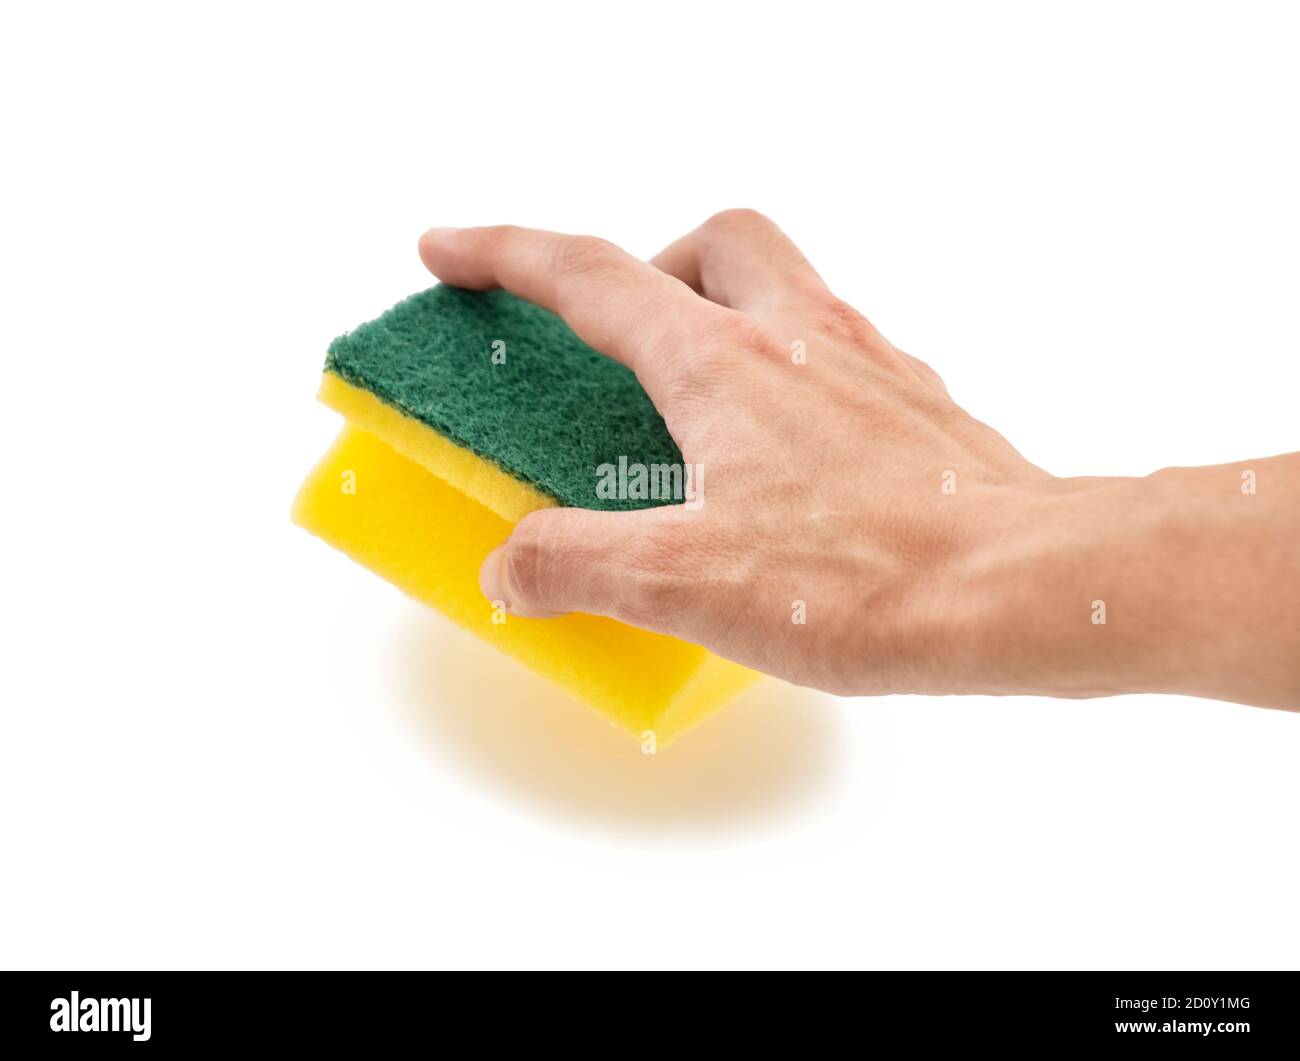 Woman's Hand Holding A Dish Sponge, Isolated On White Surface Stock Photo